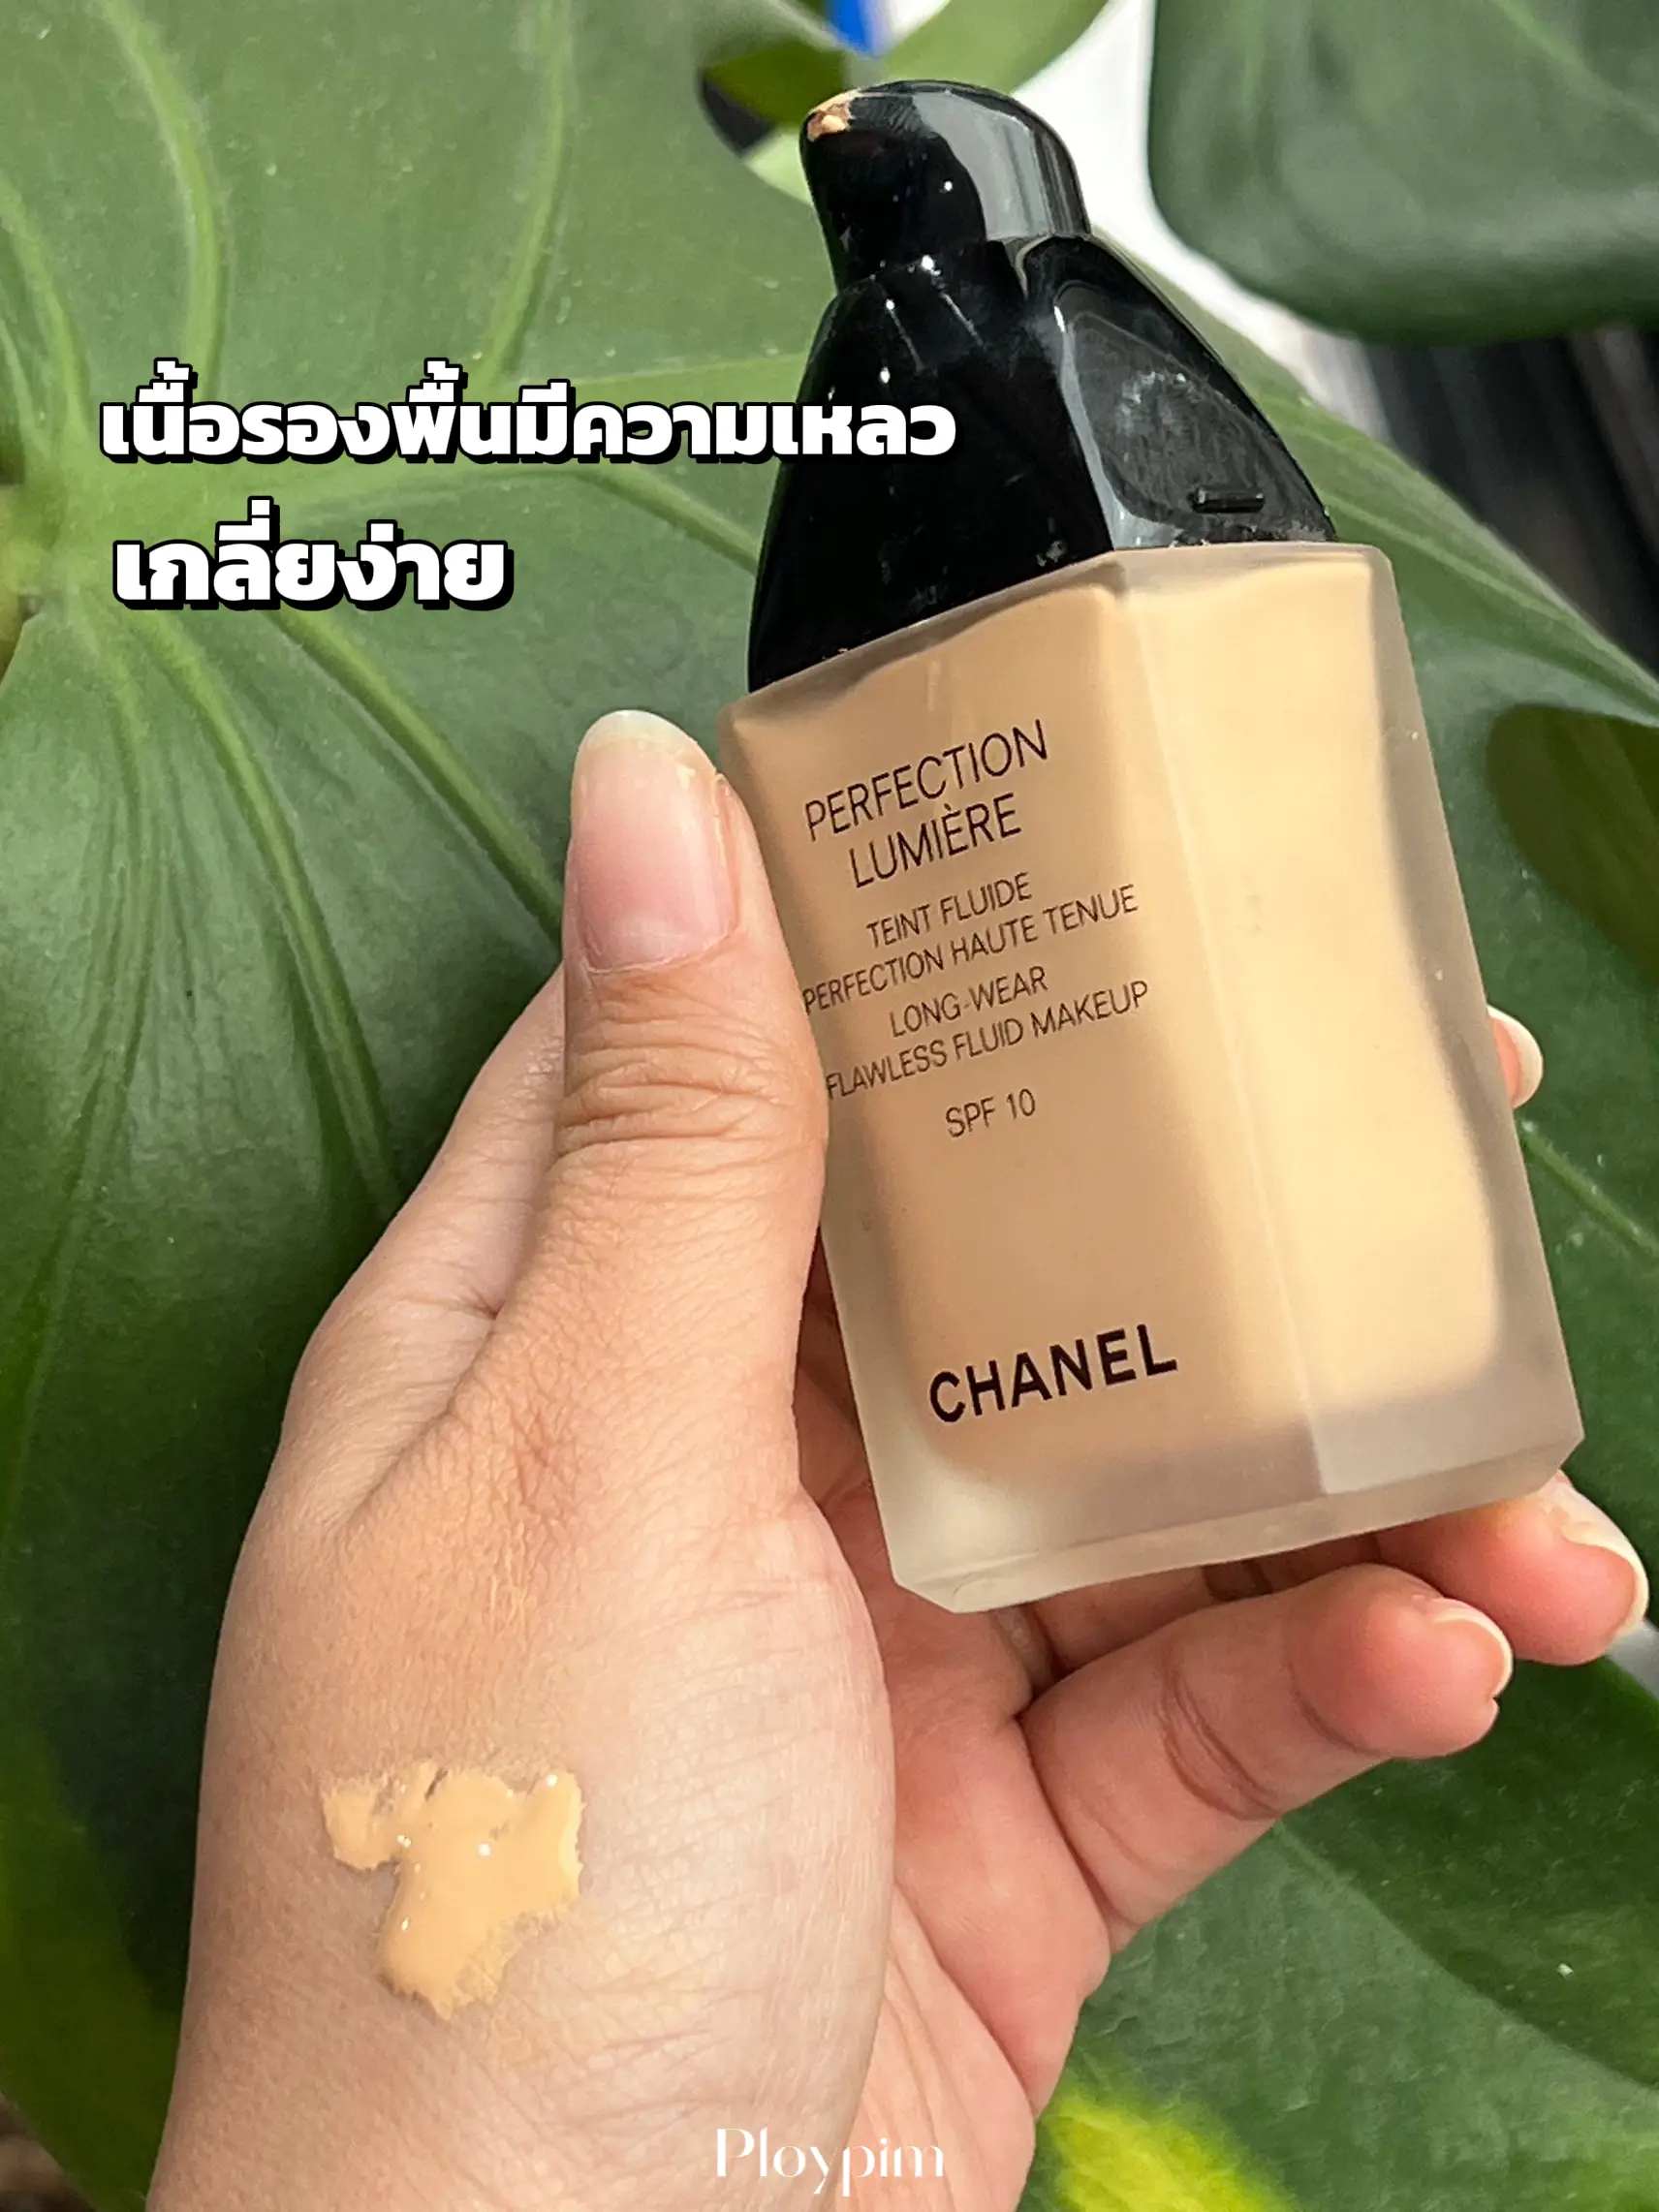 Chanel Perfection Lumière Foundation in Beige 30 - The Beauty Look